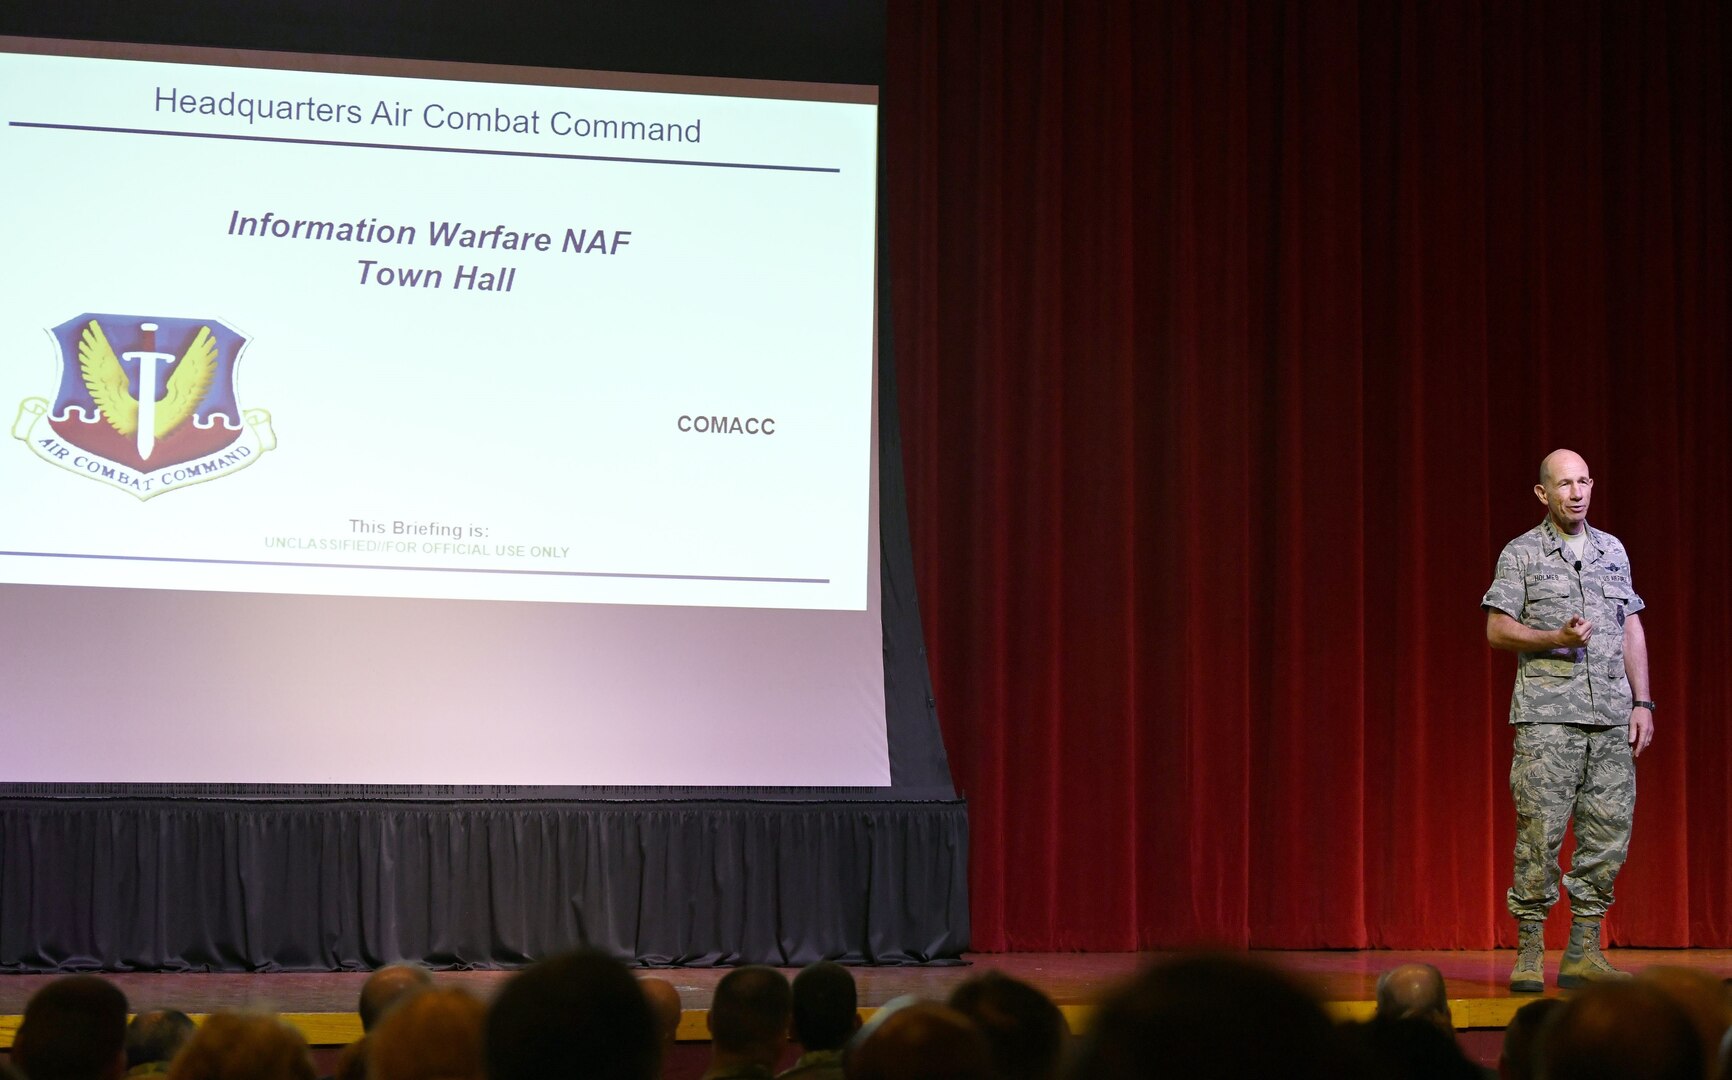 Gen. Mike Holmes, commander of Air Combat Command, greets attendees at a town hall meeting to discuss the future 24th and 25th Air Force merger at Joint Base San Antonio-Lackland July 8. The merged information warfare numbered air force will integrate cyberspace and intelligence, surveillance and reconnaissance to best deliver information warfare capabilities and effects.